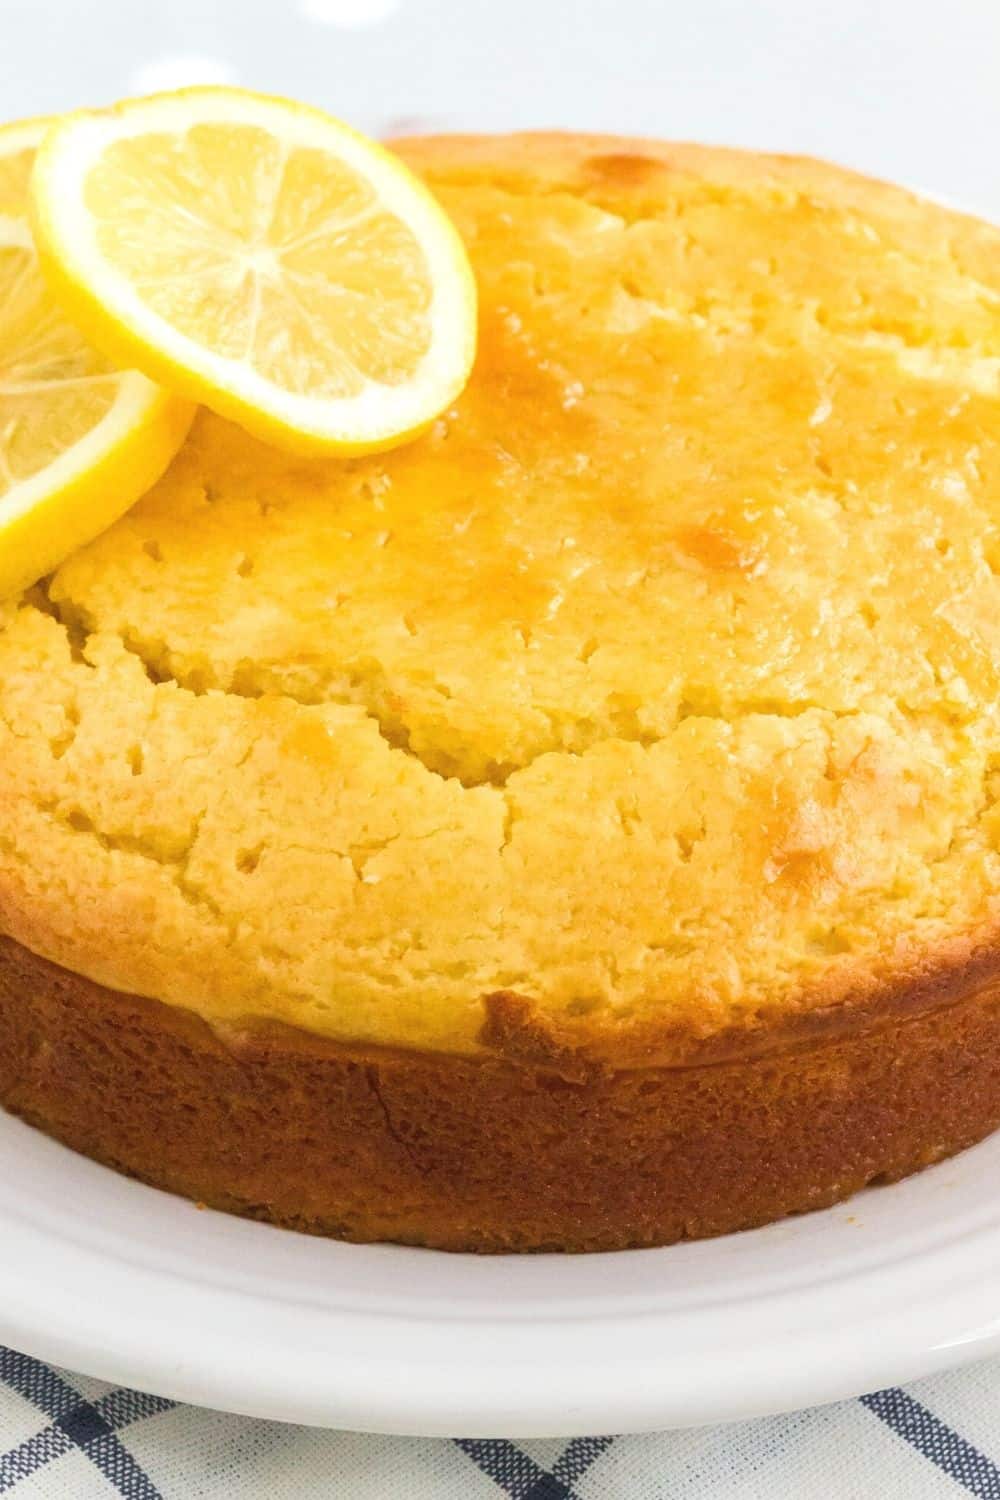 side view of a lemon syrup cake, showing the golden-brown edges and the syrup drizzled in through small holes.